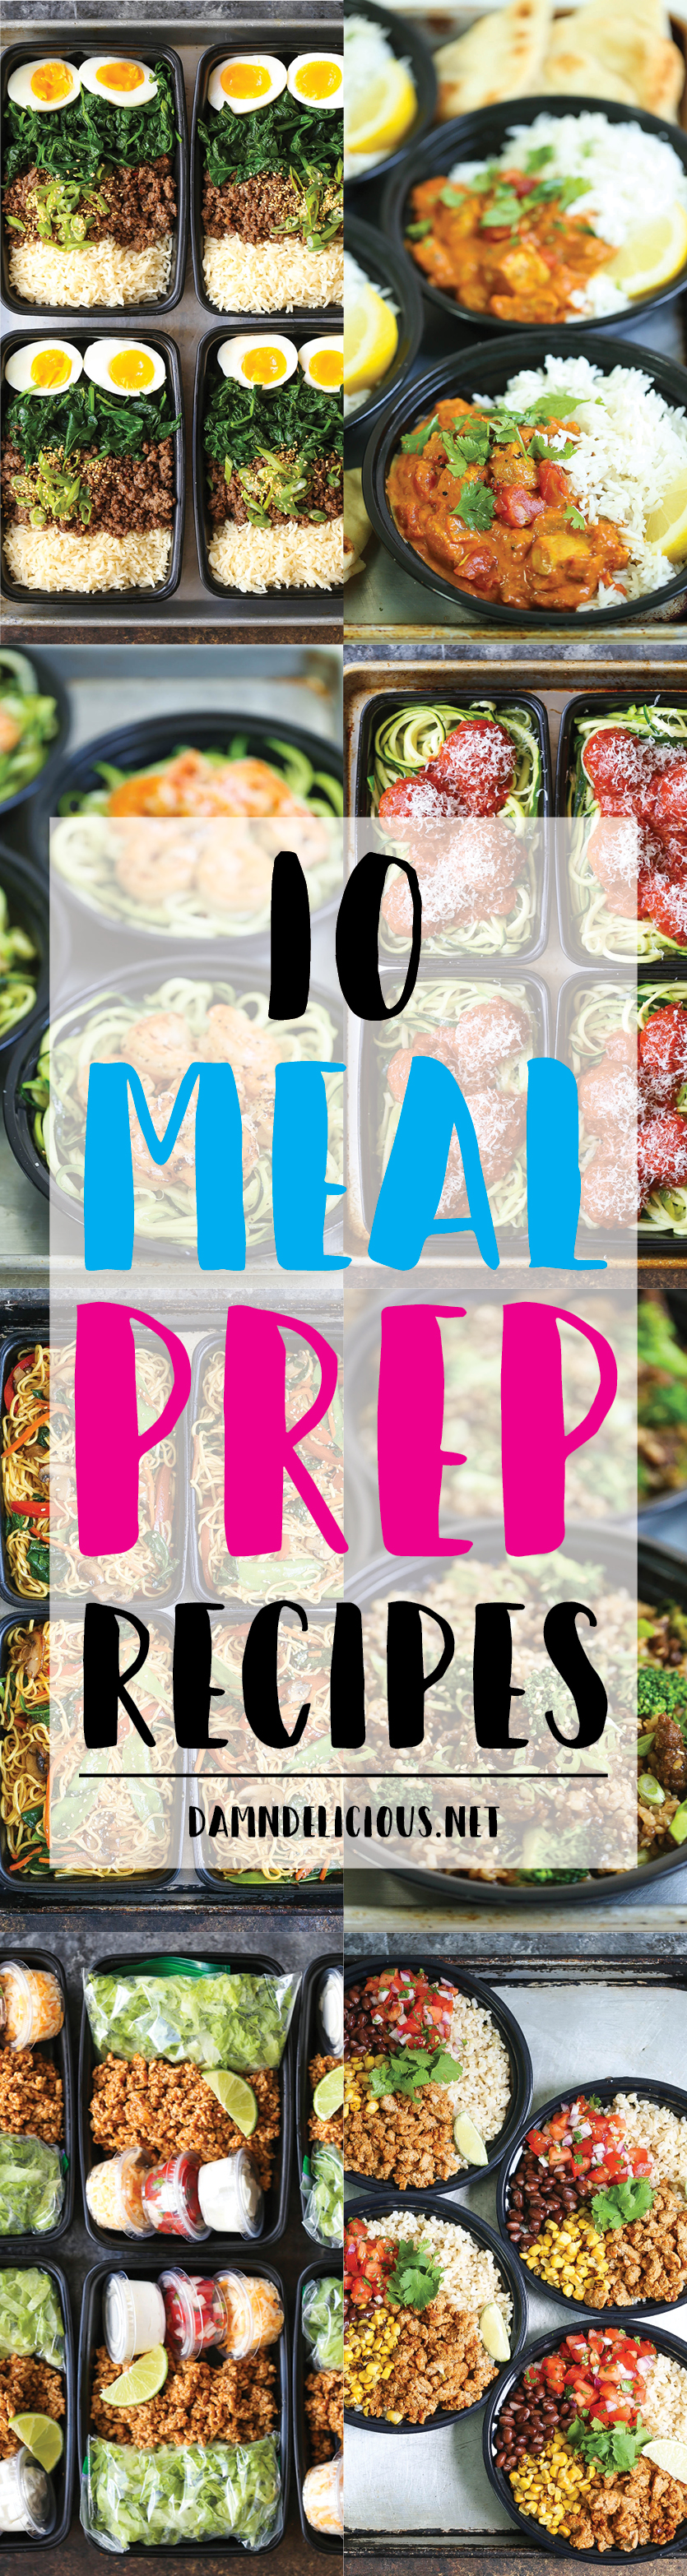 10 Meal Prep Recipes - Quick, simple meal prep ideas that are not boring at all! Prep for the week ahead for chicken burrito bowls, lo mein and Korean beef!